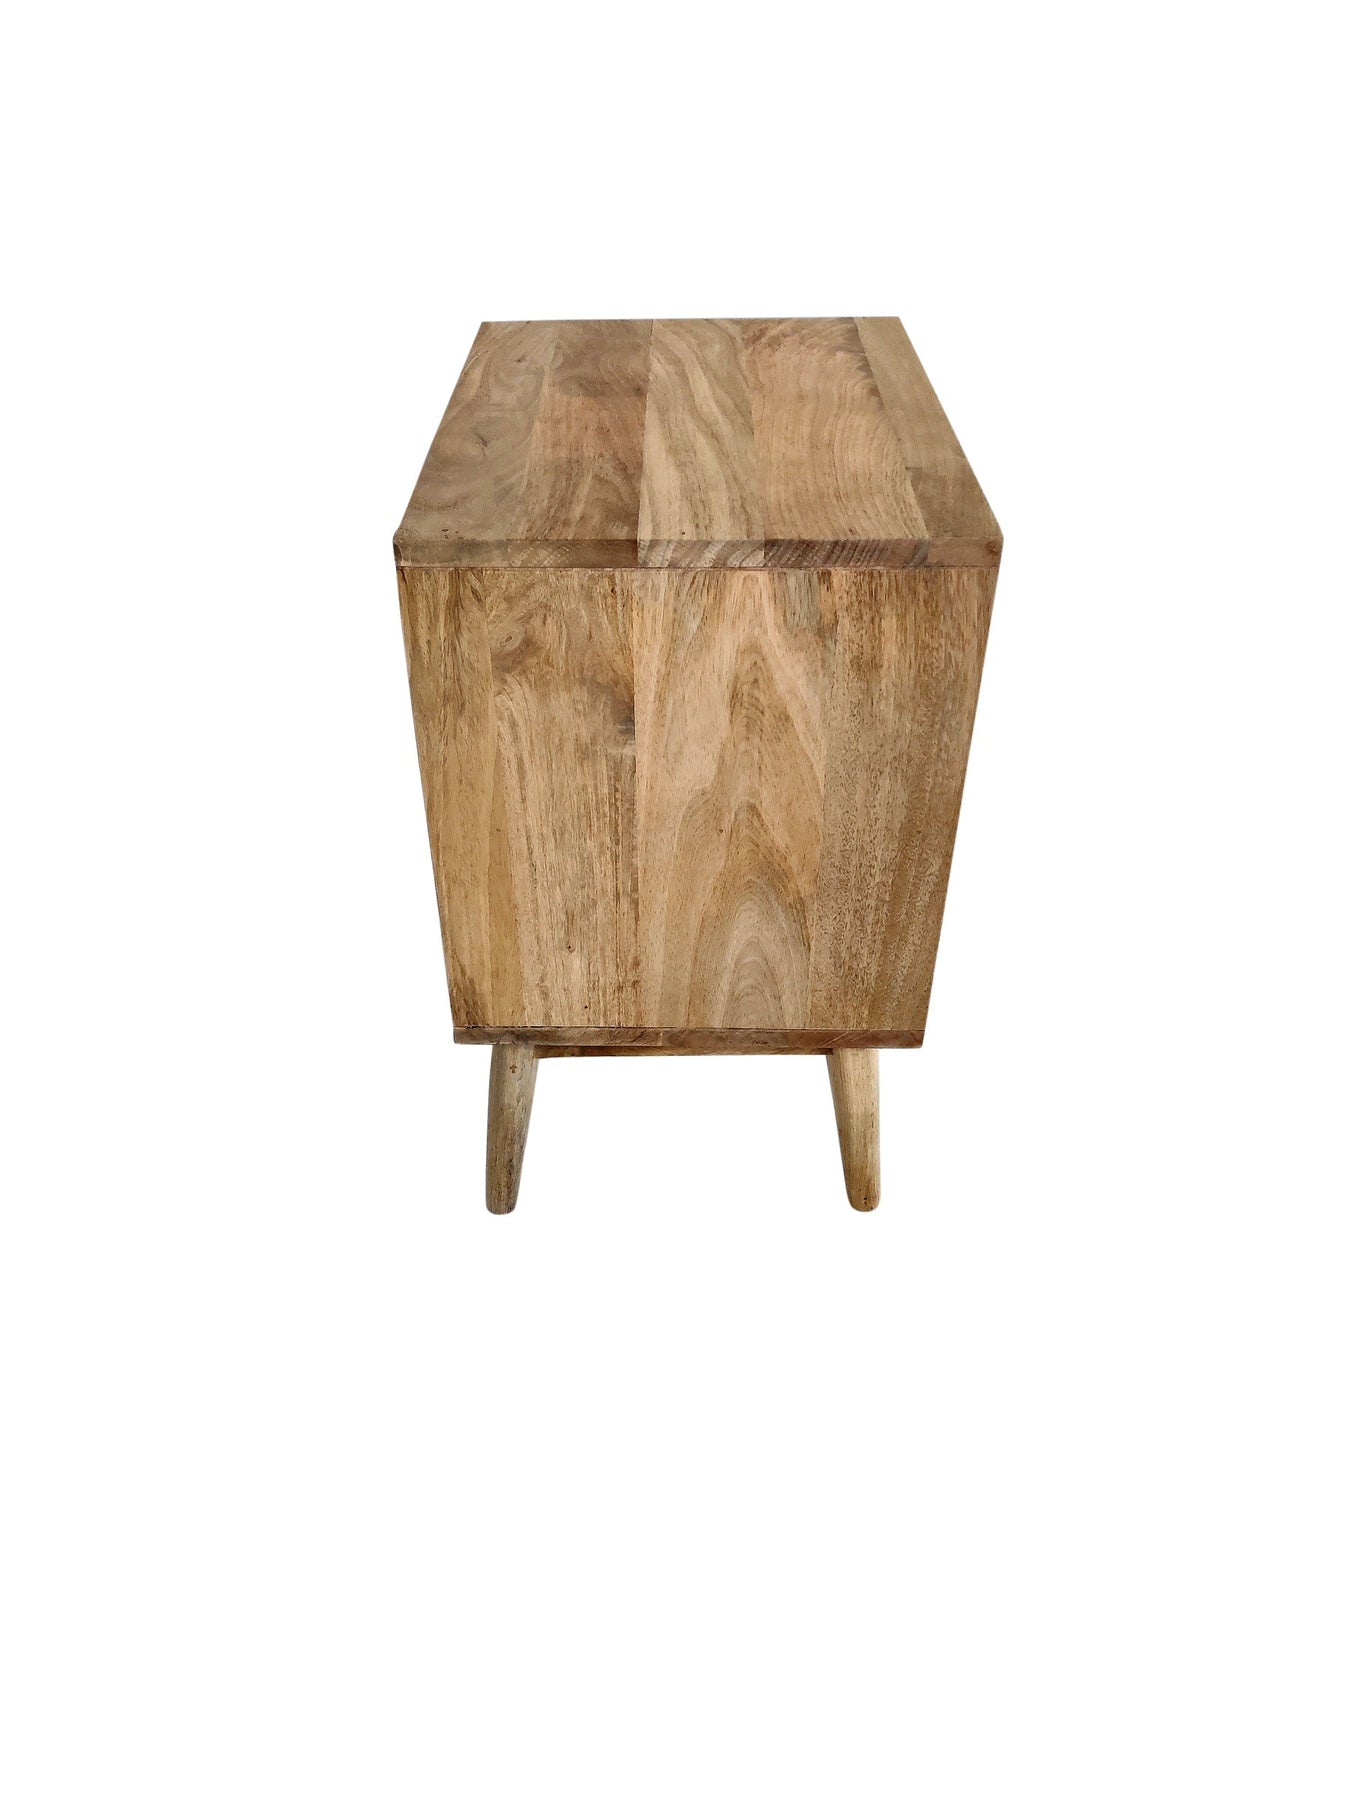 Wooden Retro Sixties Bed Side Table | 42x32x56 cm